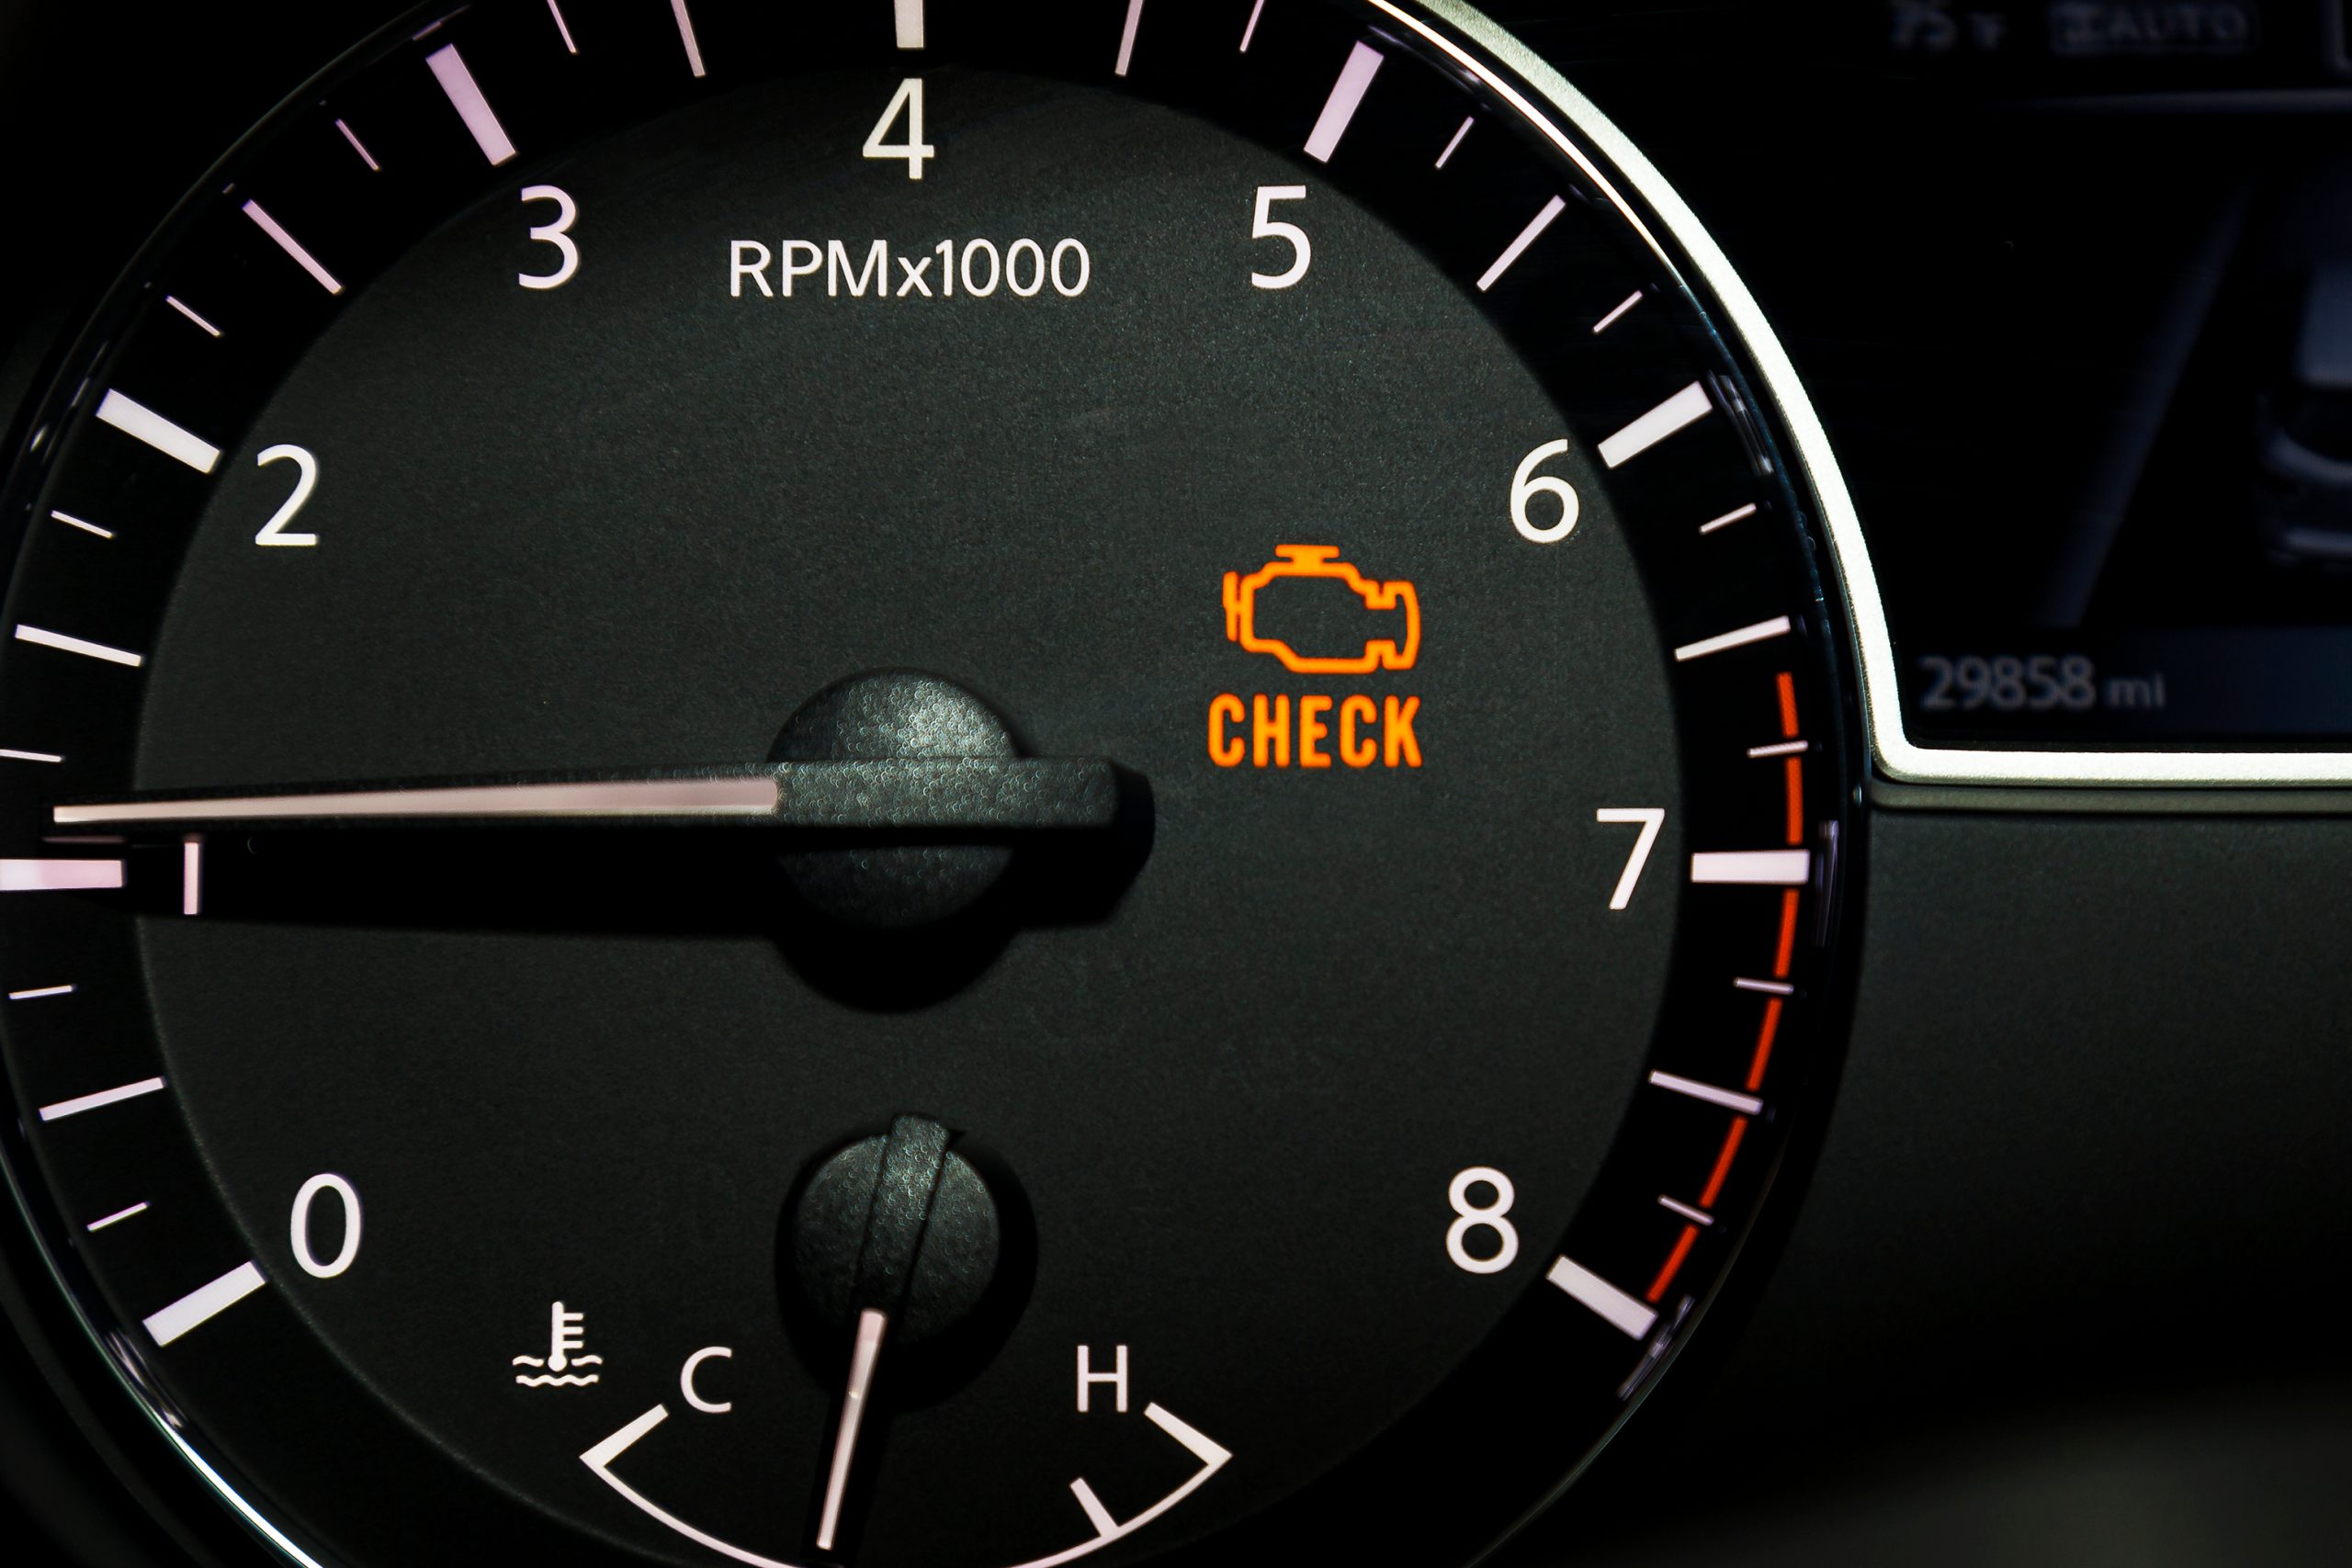 What to Do After the Check Engine Light Comes on